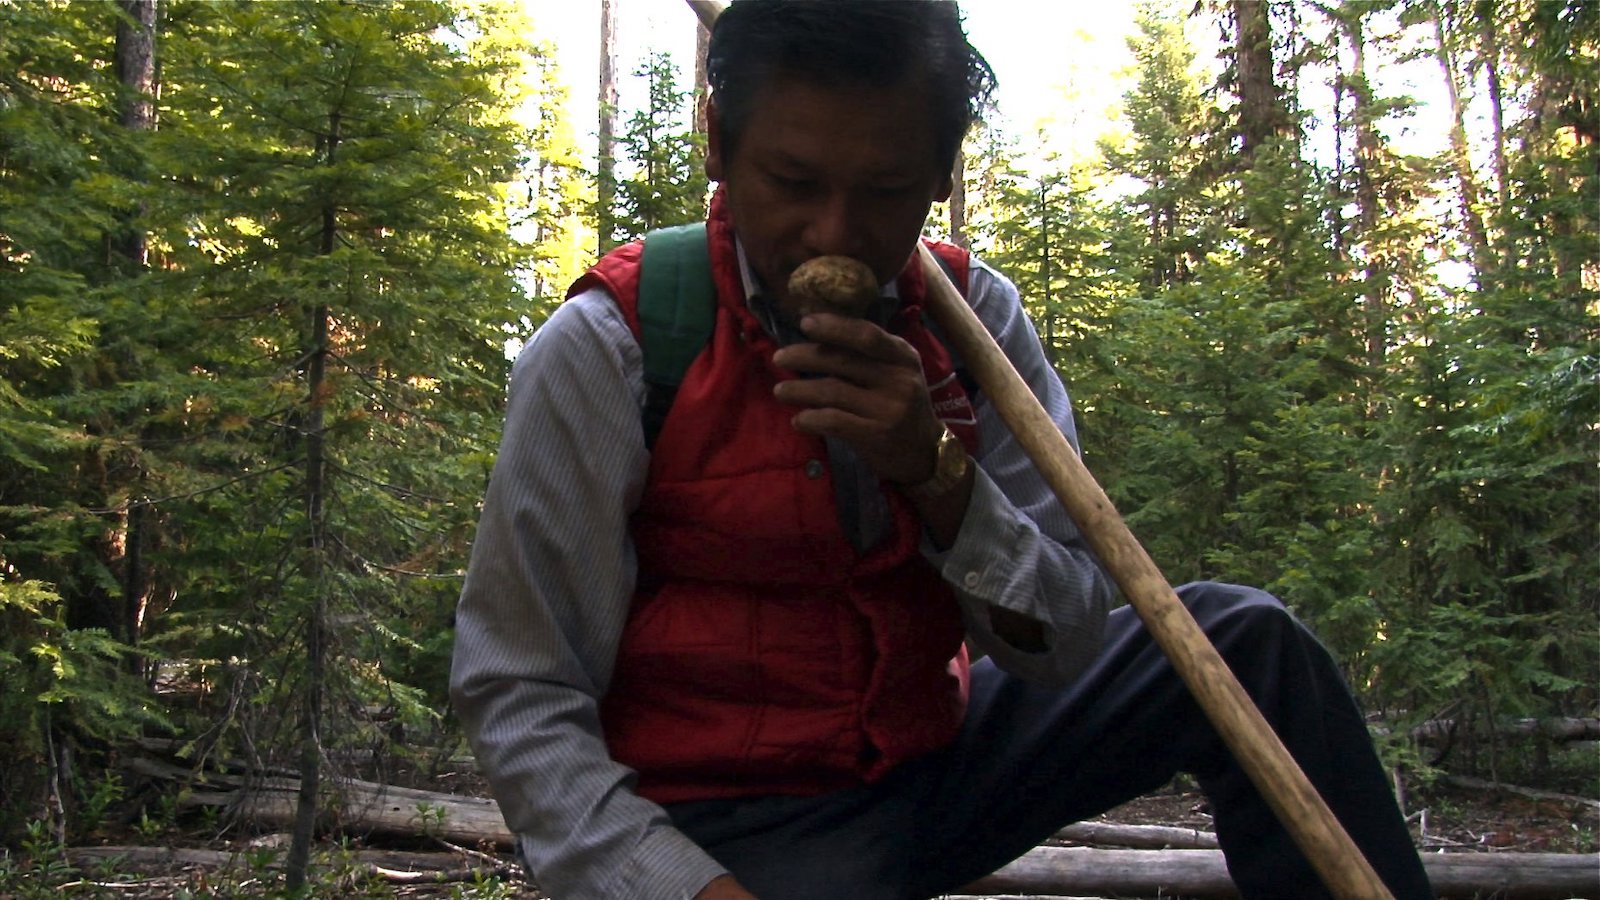 A man holds a mushroom up to his nose while crouching in the woods.